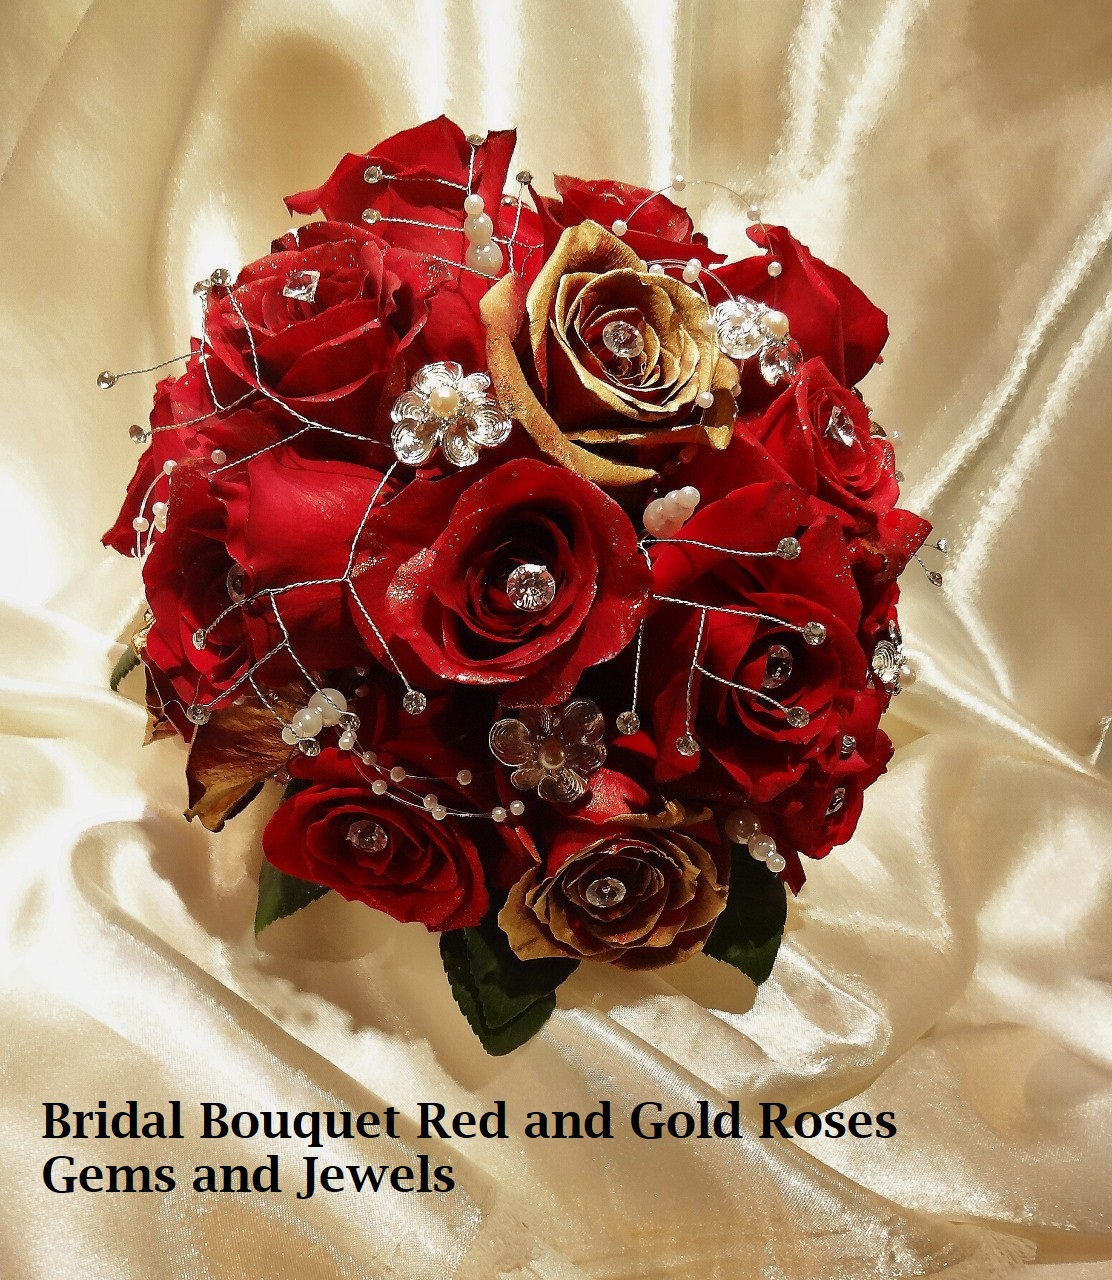 Check availability  $160 Bridal Bouquet Red and Gold Roses 
Gems and Jewels 